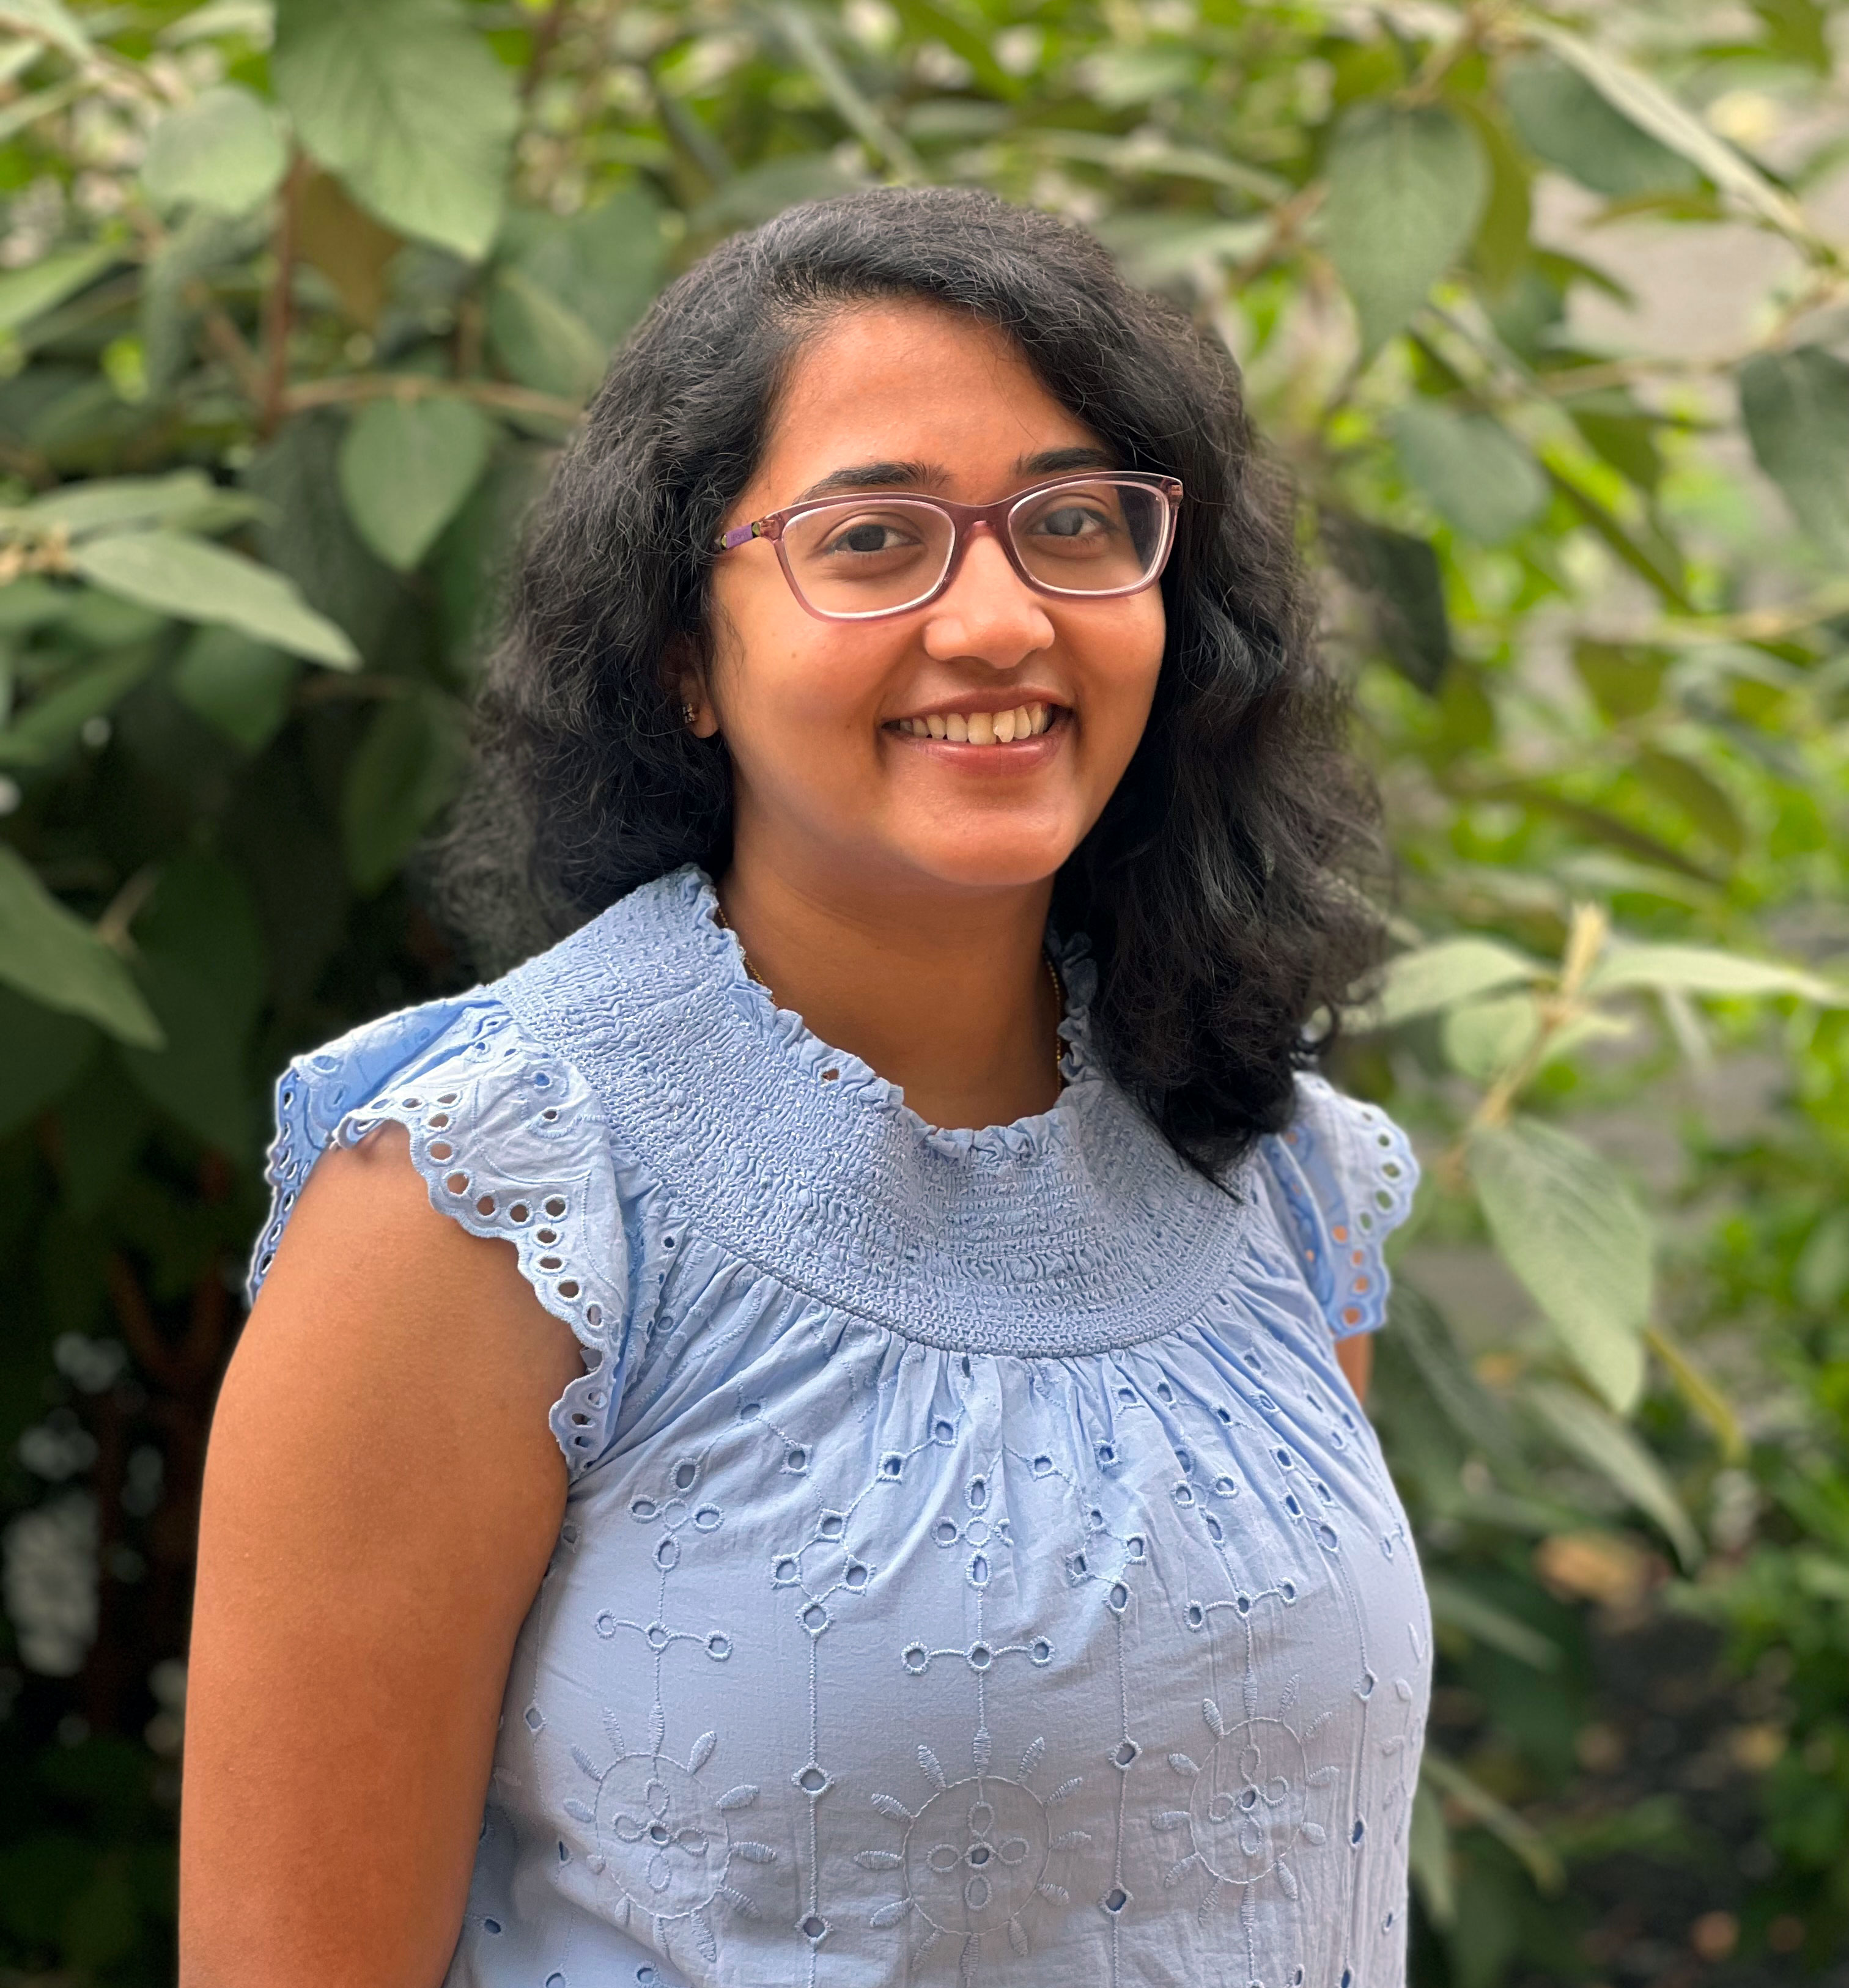 Mounika Bobba, Data Analytics Specialist, wears a blouse in her headshot and stands in front of a tree